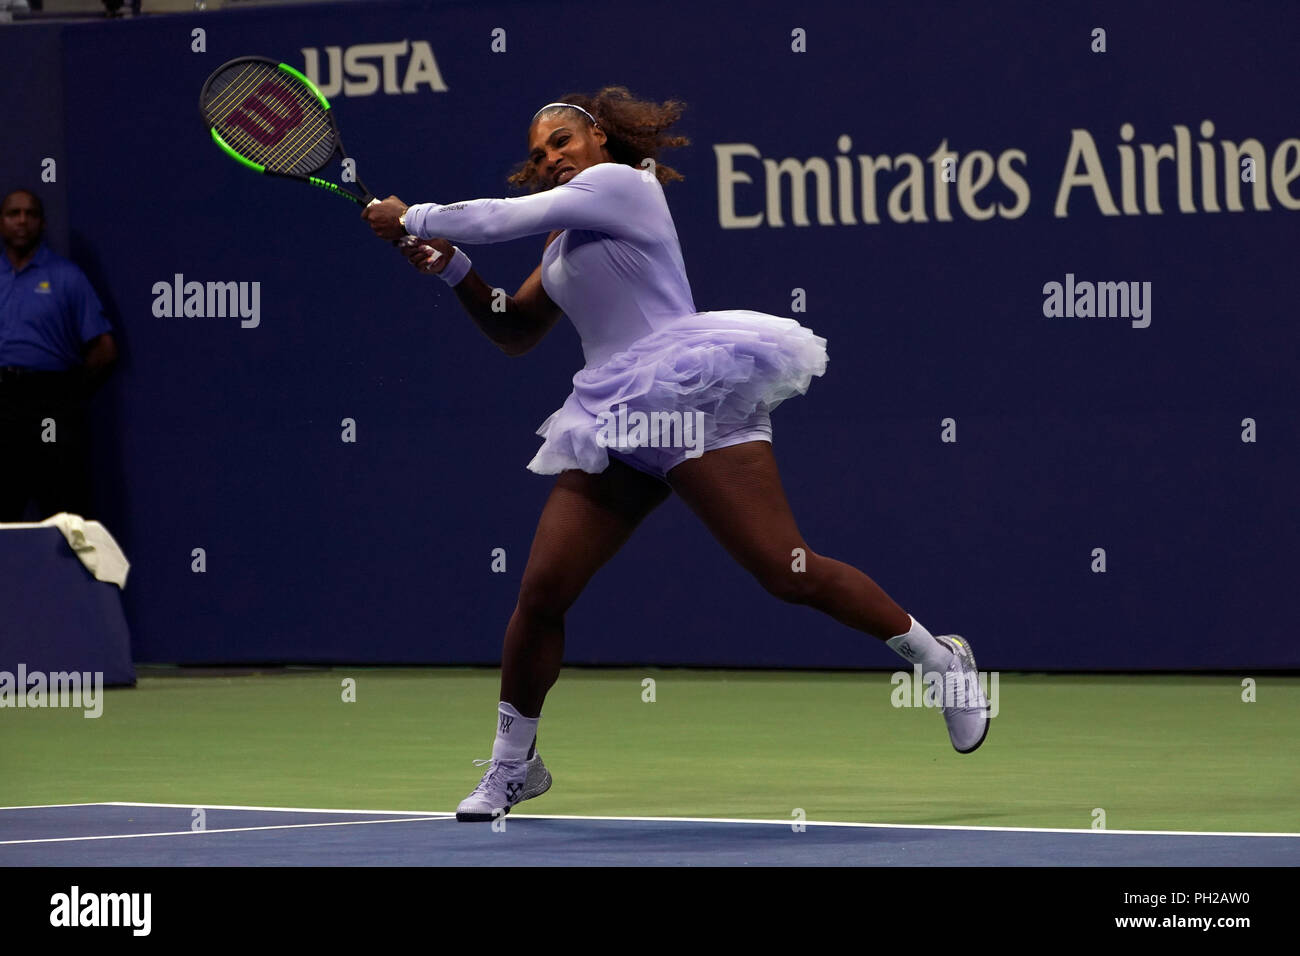 New York, United States. 29th Aug, 2018. Flushing Meadows, New York - August 29, 2018: US Open Tennis: Serena Williams in action during her second round match against opponent Carina Withoeft of Germany at the US Open in Flushing Meadows, New York. Williams won the match in straight sets to advance to the next round. Credit: Adam Stoltman/Alamy Live News Stock Photo